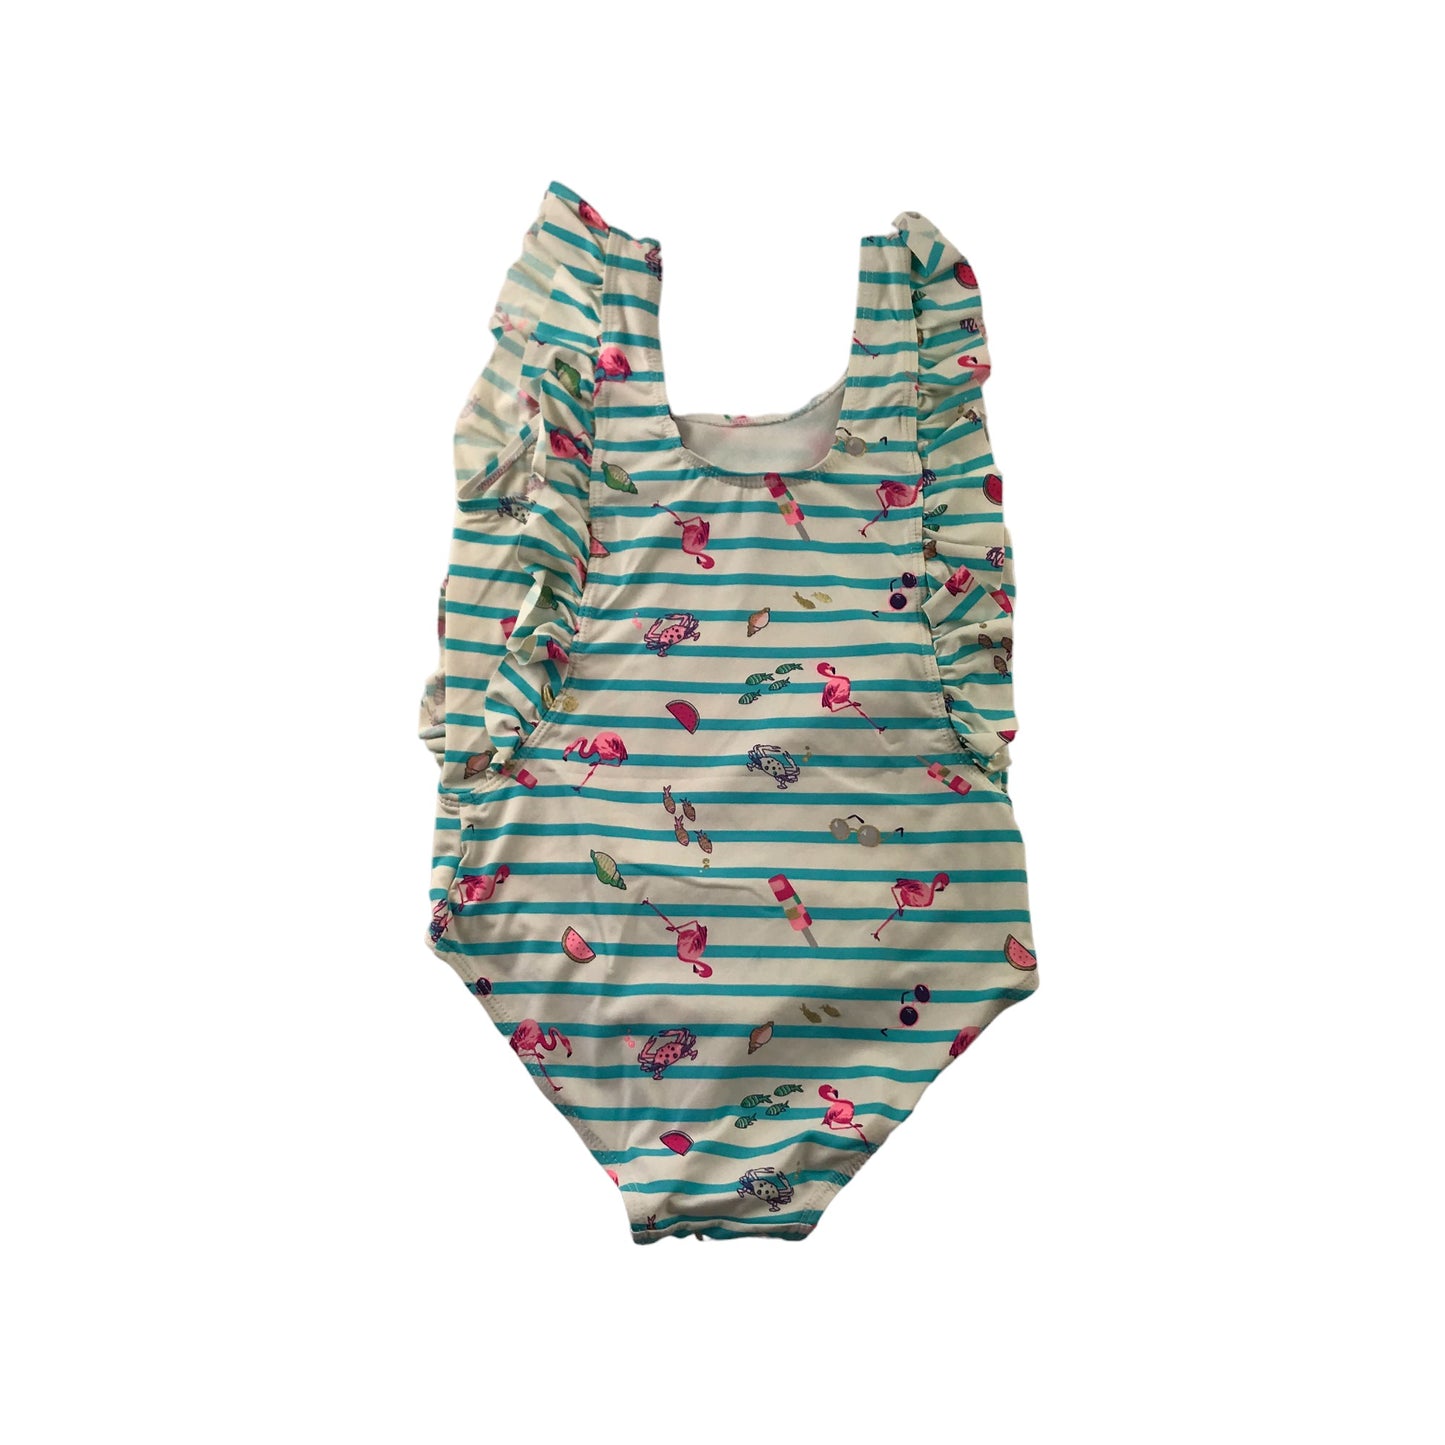 Monsoon Swimsuit Age 7 Light Blue Stripy Beach Holiday Theme One Piece Cossie